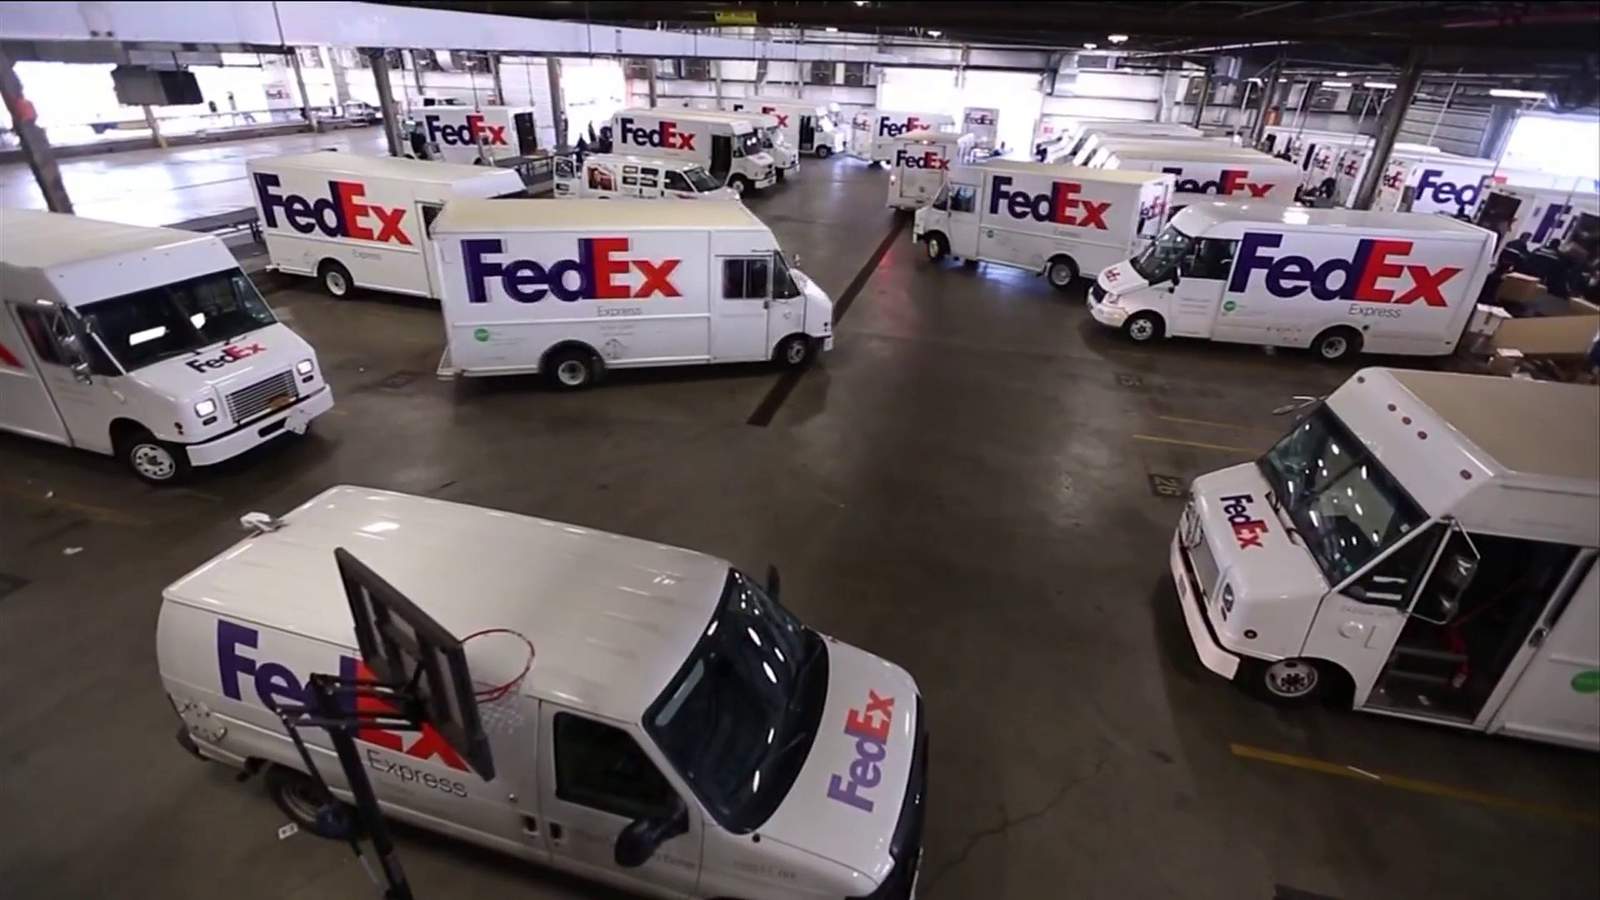 FedEx comes under fire in Jacksonville over delivery delays